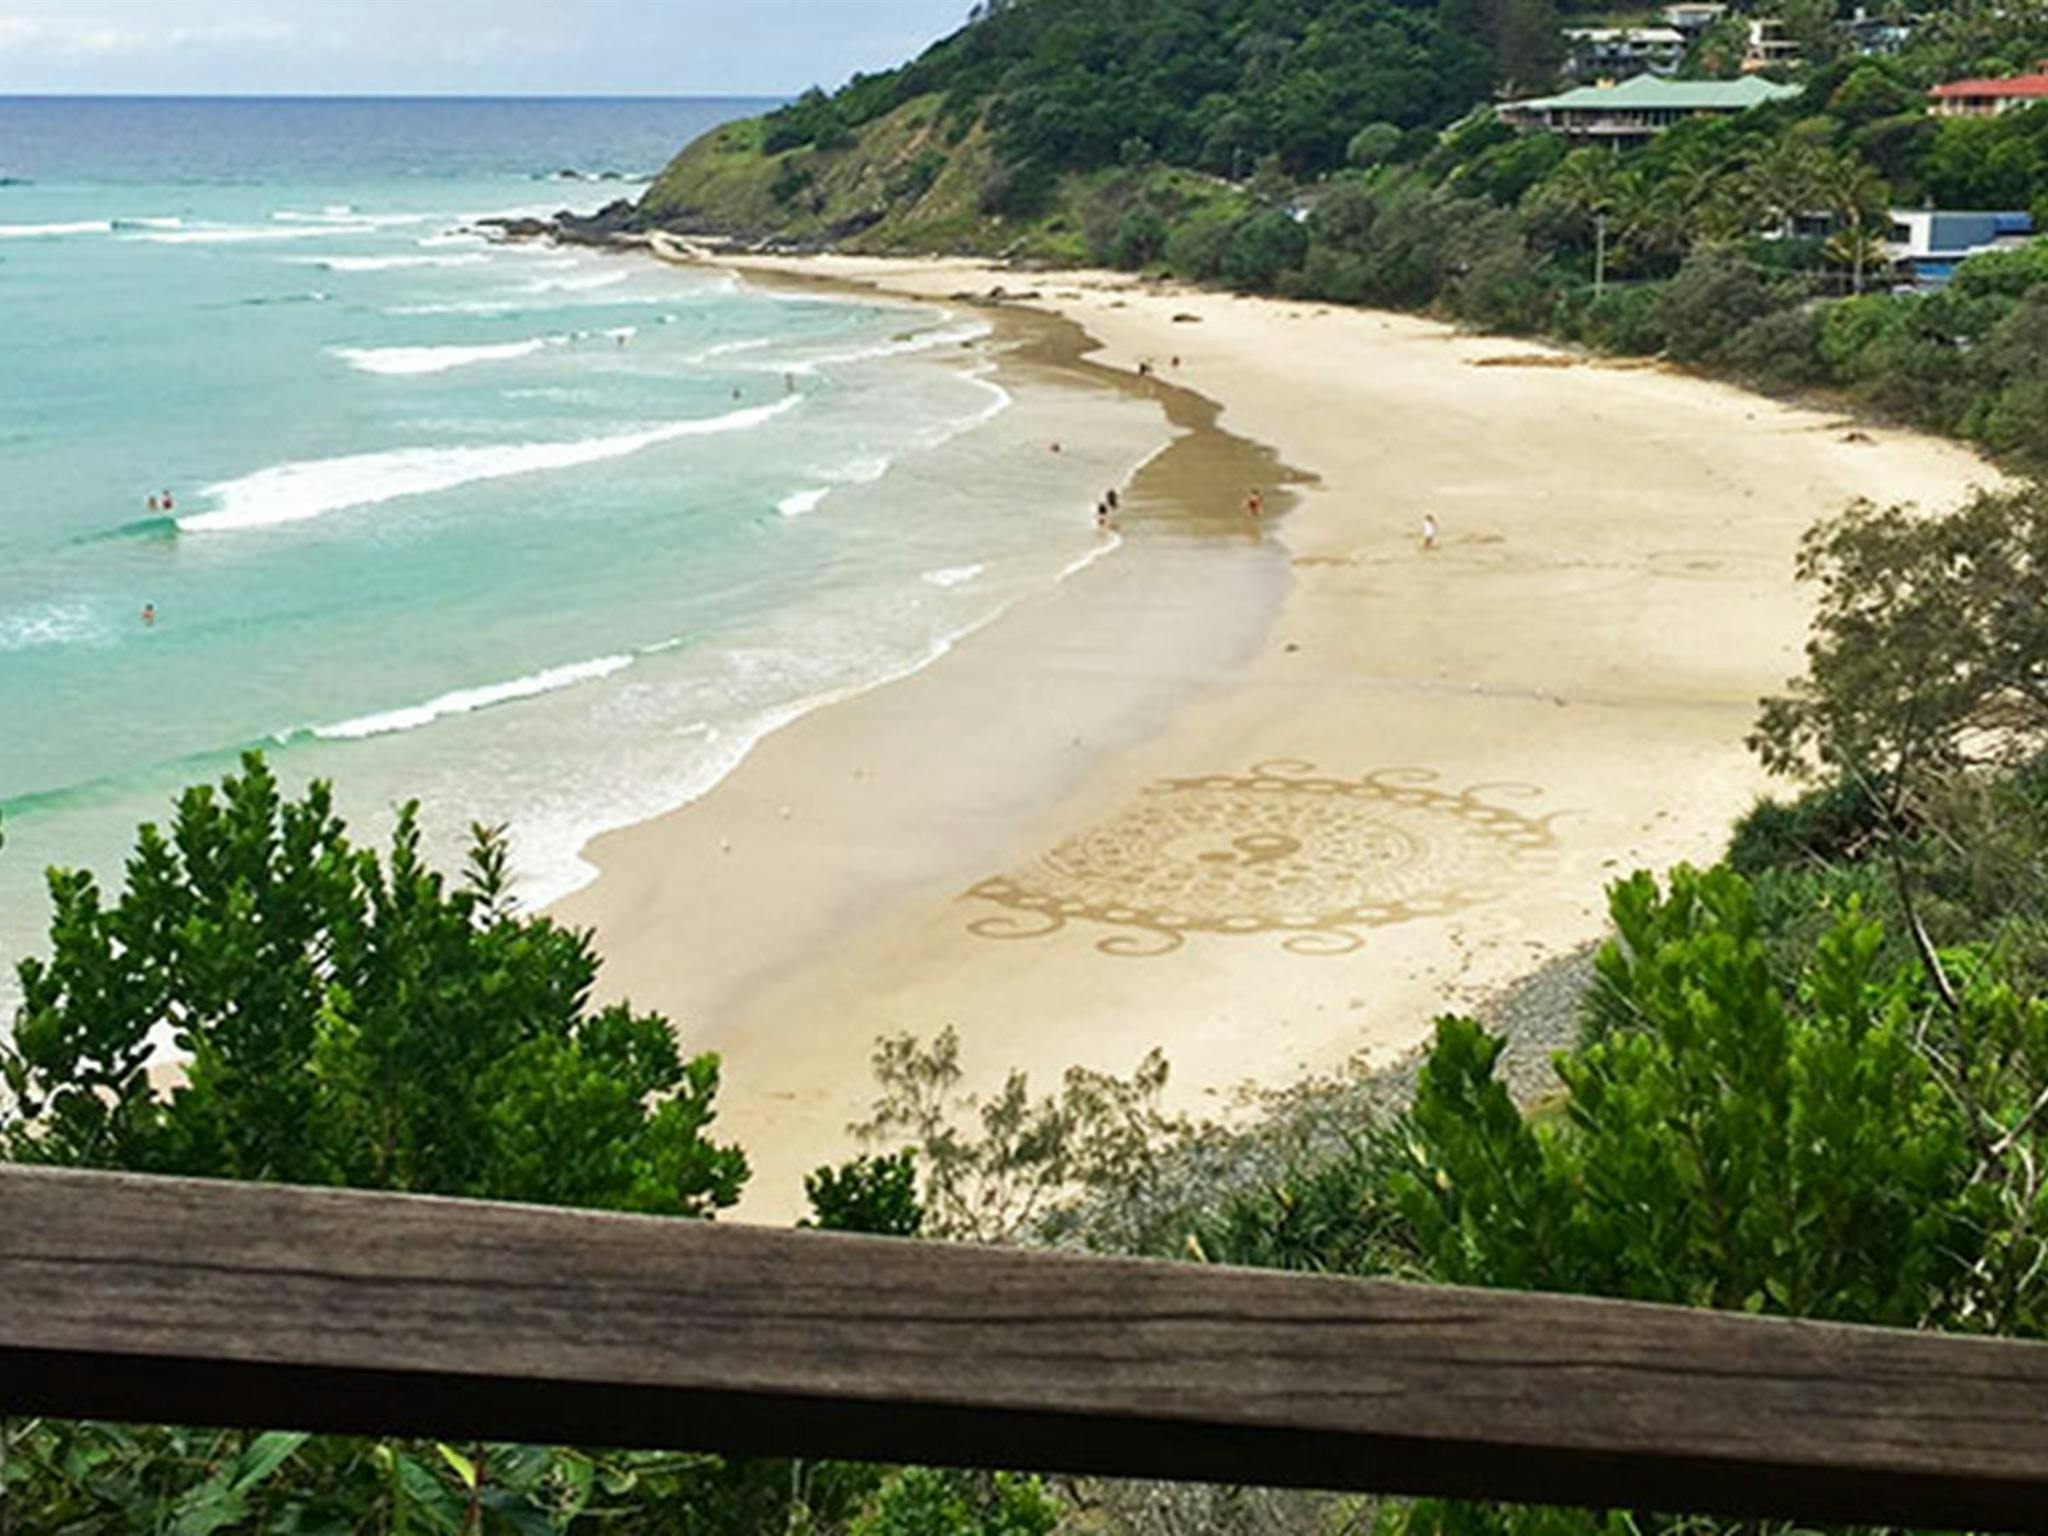 Byron Bay, North Coast – Accommodation, things to do, beaches & more